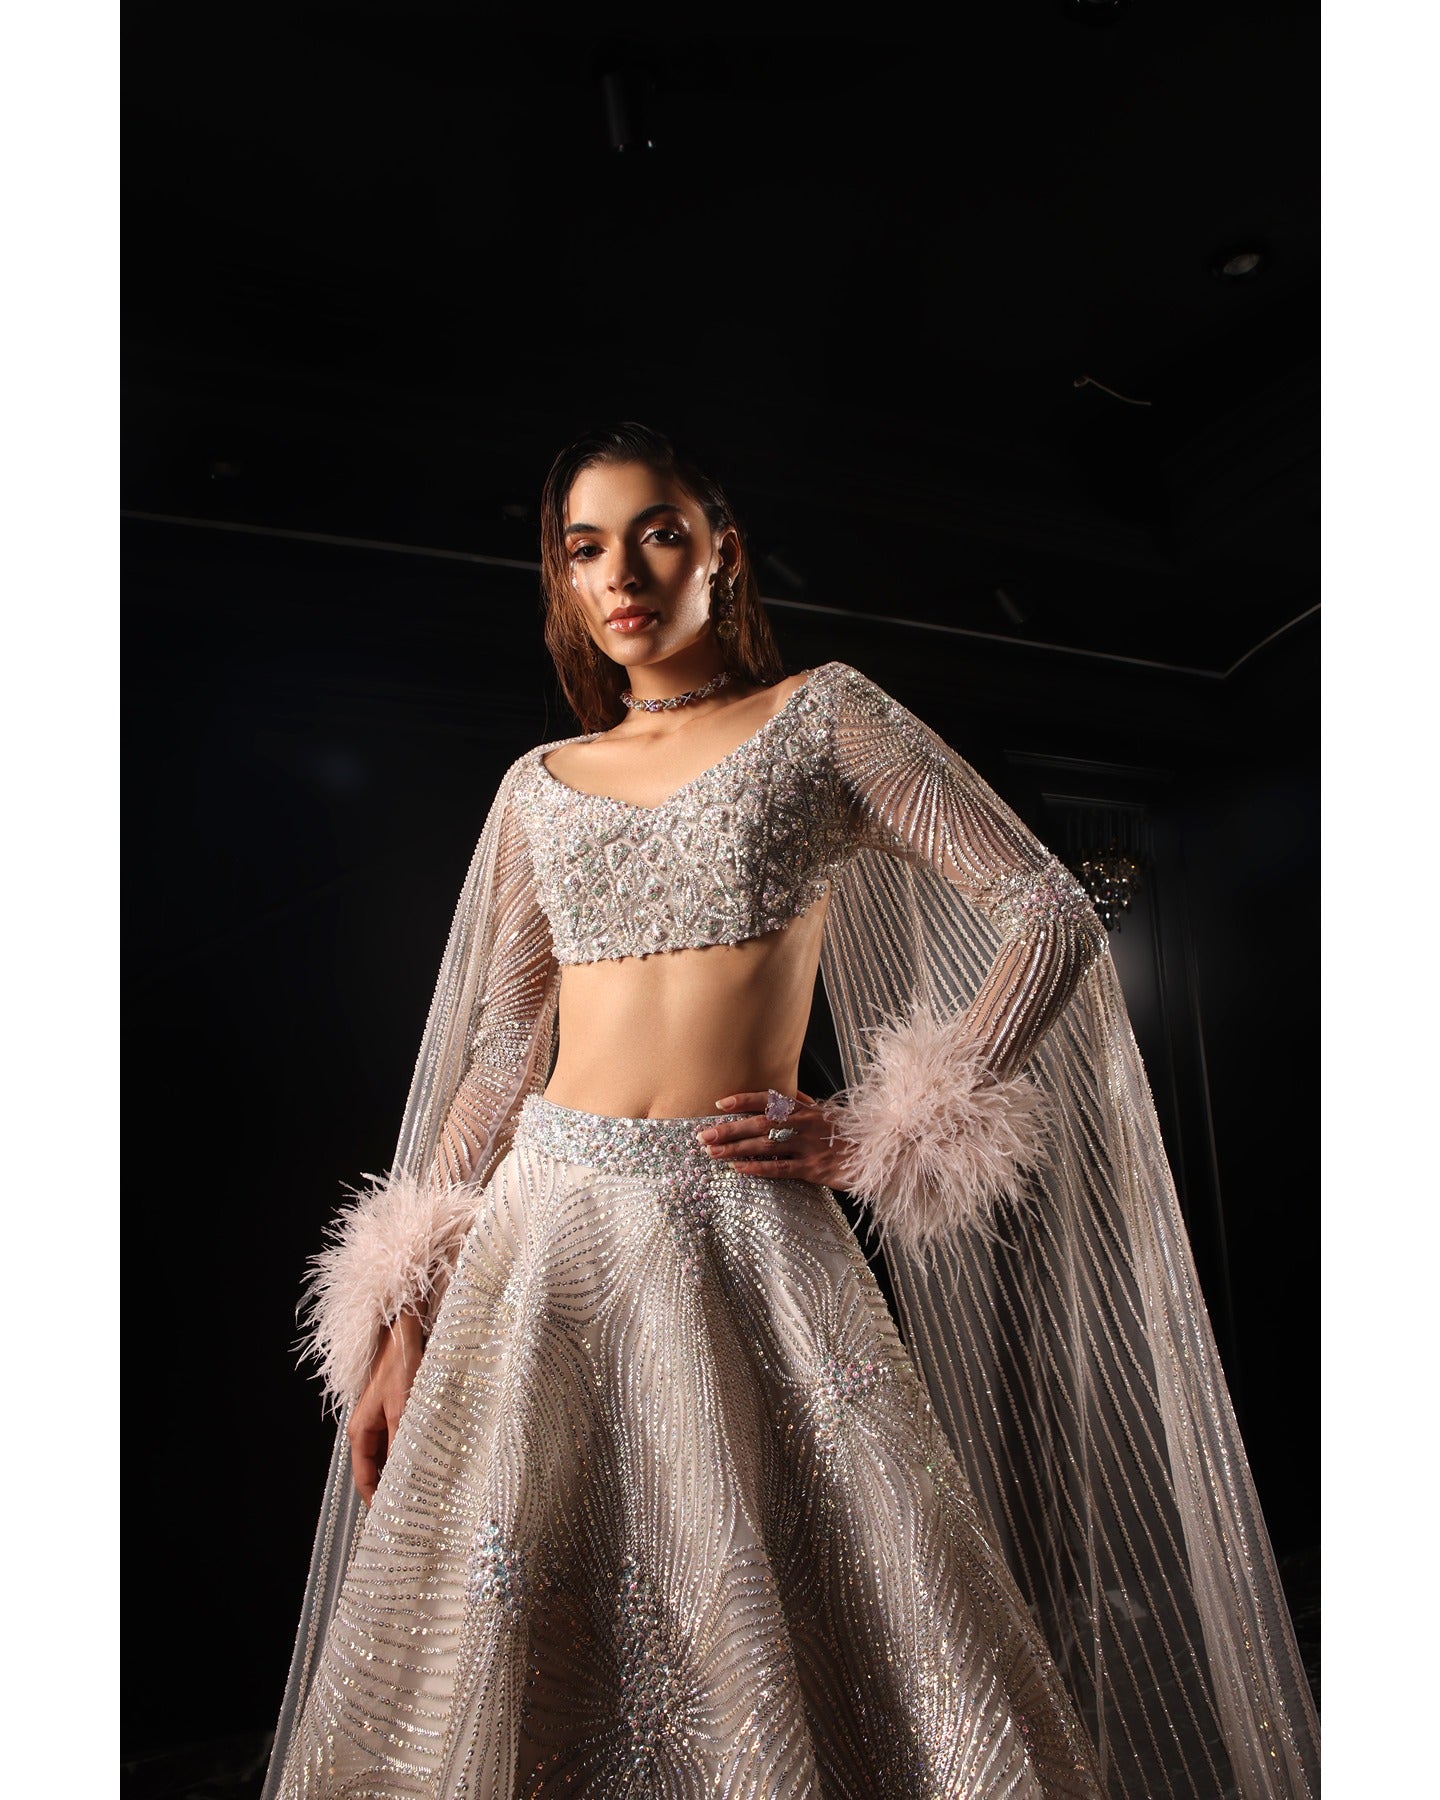 Drenched in lilac sophistication, the Orave lehenga captivates with its V-neck choli blouse and two shoulder trails embellished with Swarovski crystals, feathers, and sequins.